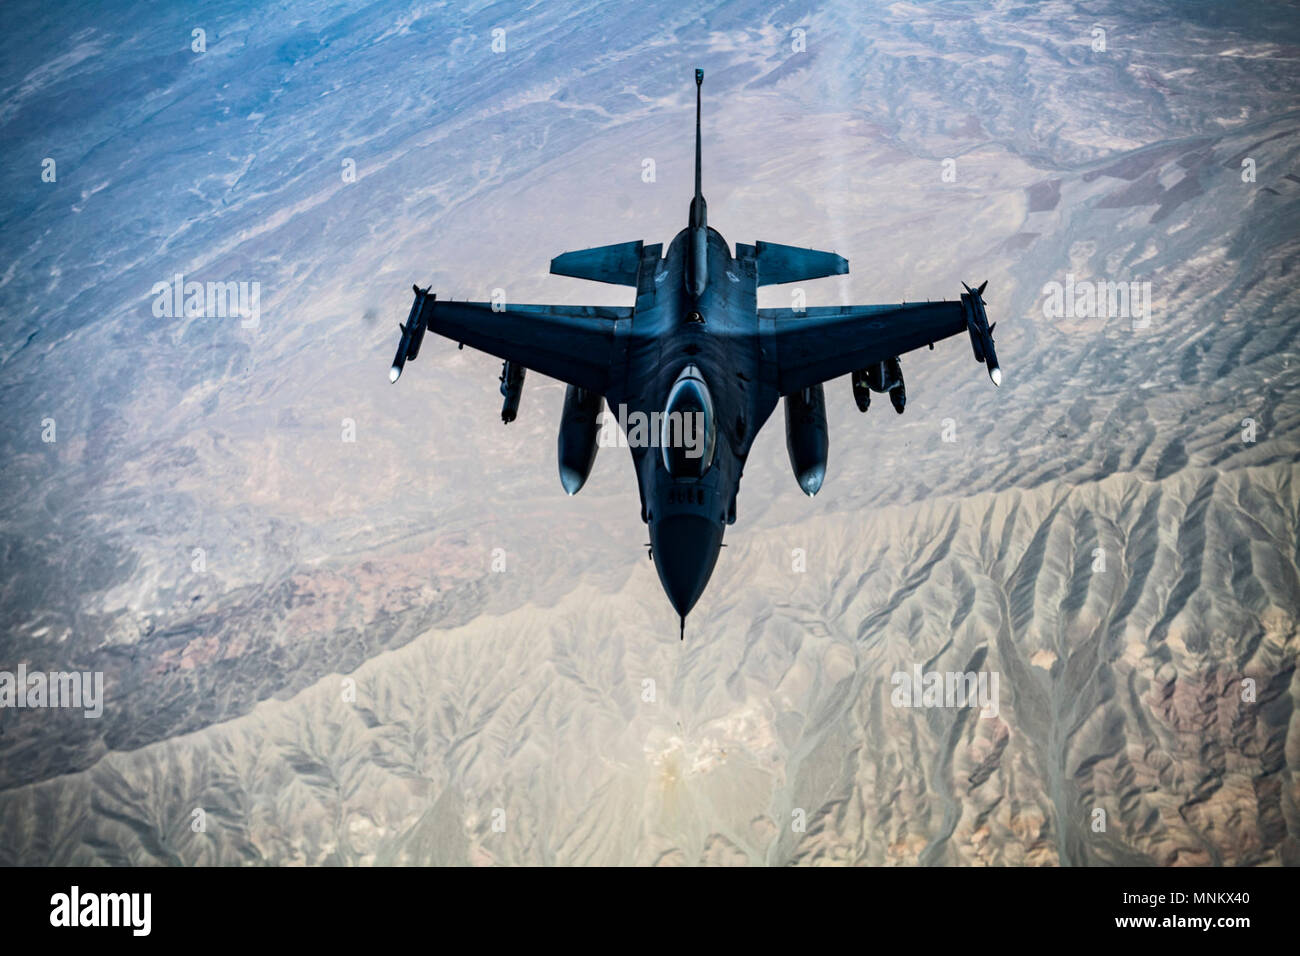 A U.S. Air Force F-16C Fighting Falcon pilot flies in formation while his wingman conducts refueling operations with a KC-135 Stratotanker, assigned to the 340th Expeditionary Air Refueling Squadron Detatchment 1, over Afghanistan in support of Operation Freedom's Sentinel, March 11, 2018. The F-16's capabilities include air superiority, fighter escort, reconnaissance, aerial refueling, close air support, air defense suppression and precision strikes. Stock Photo